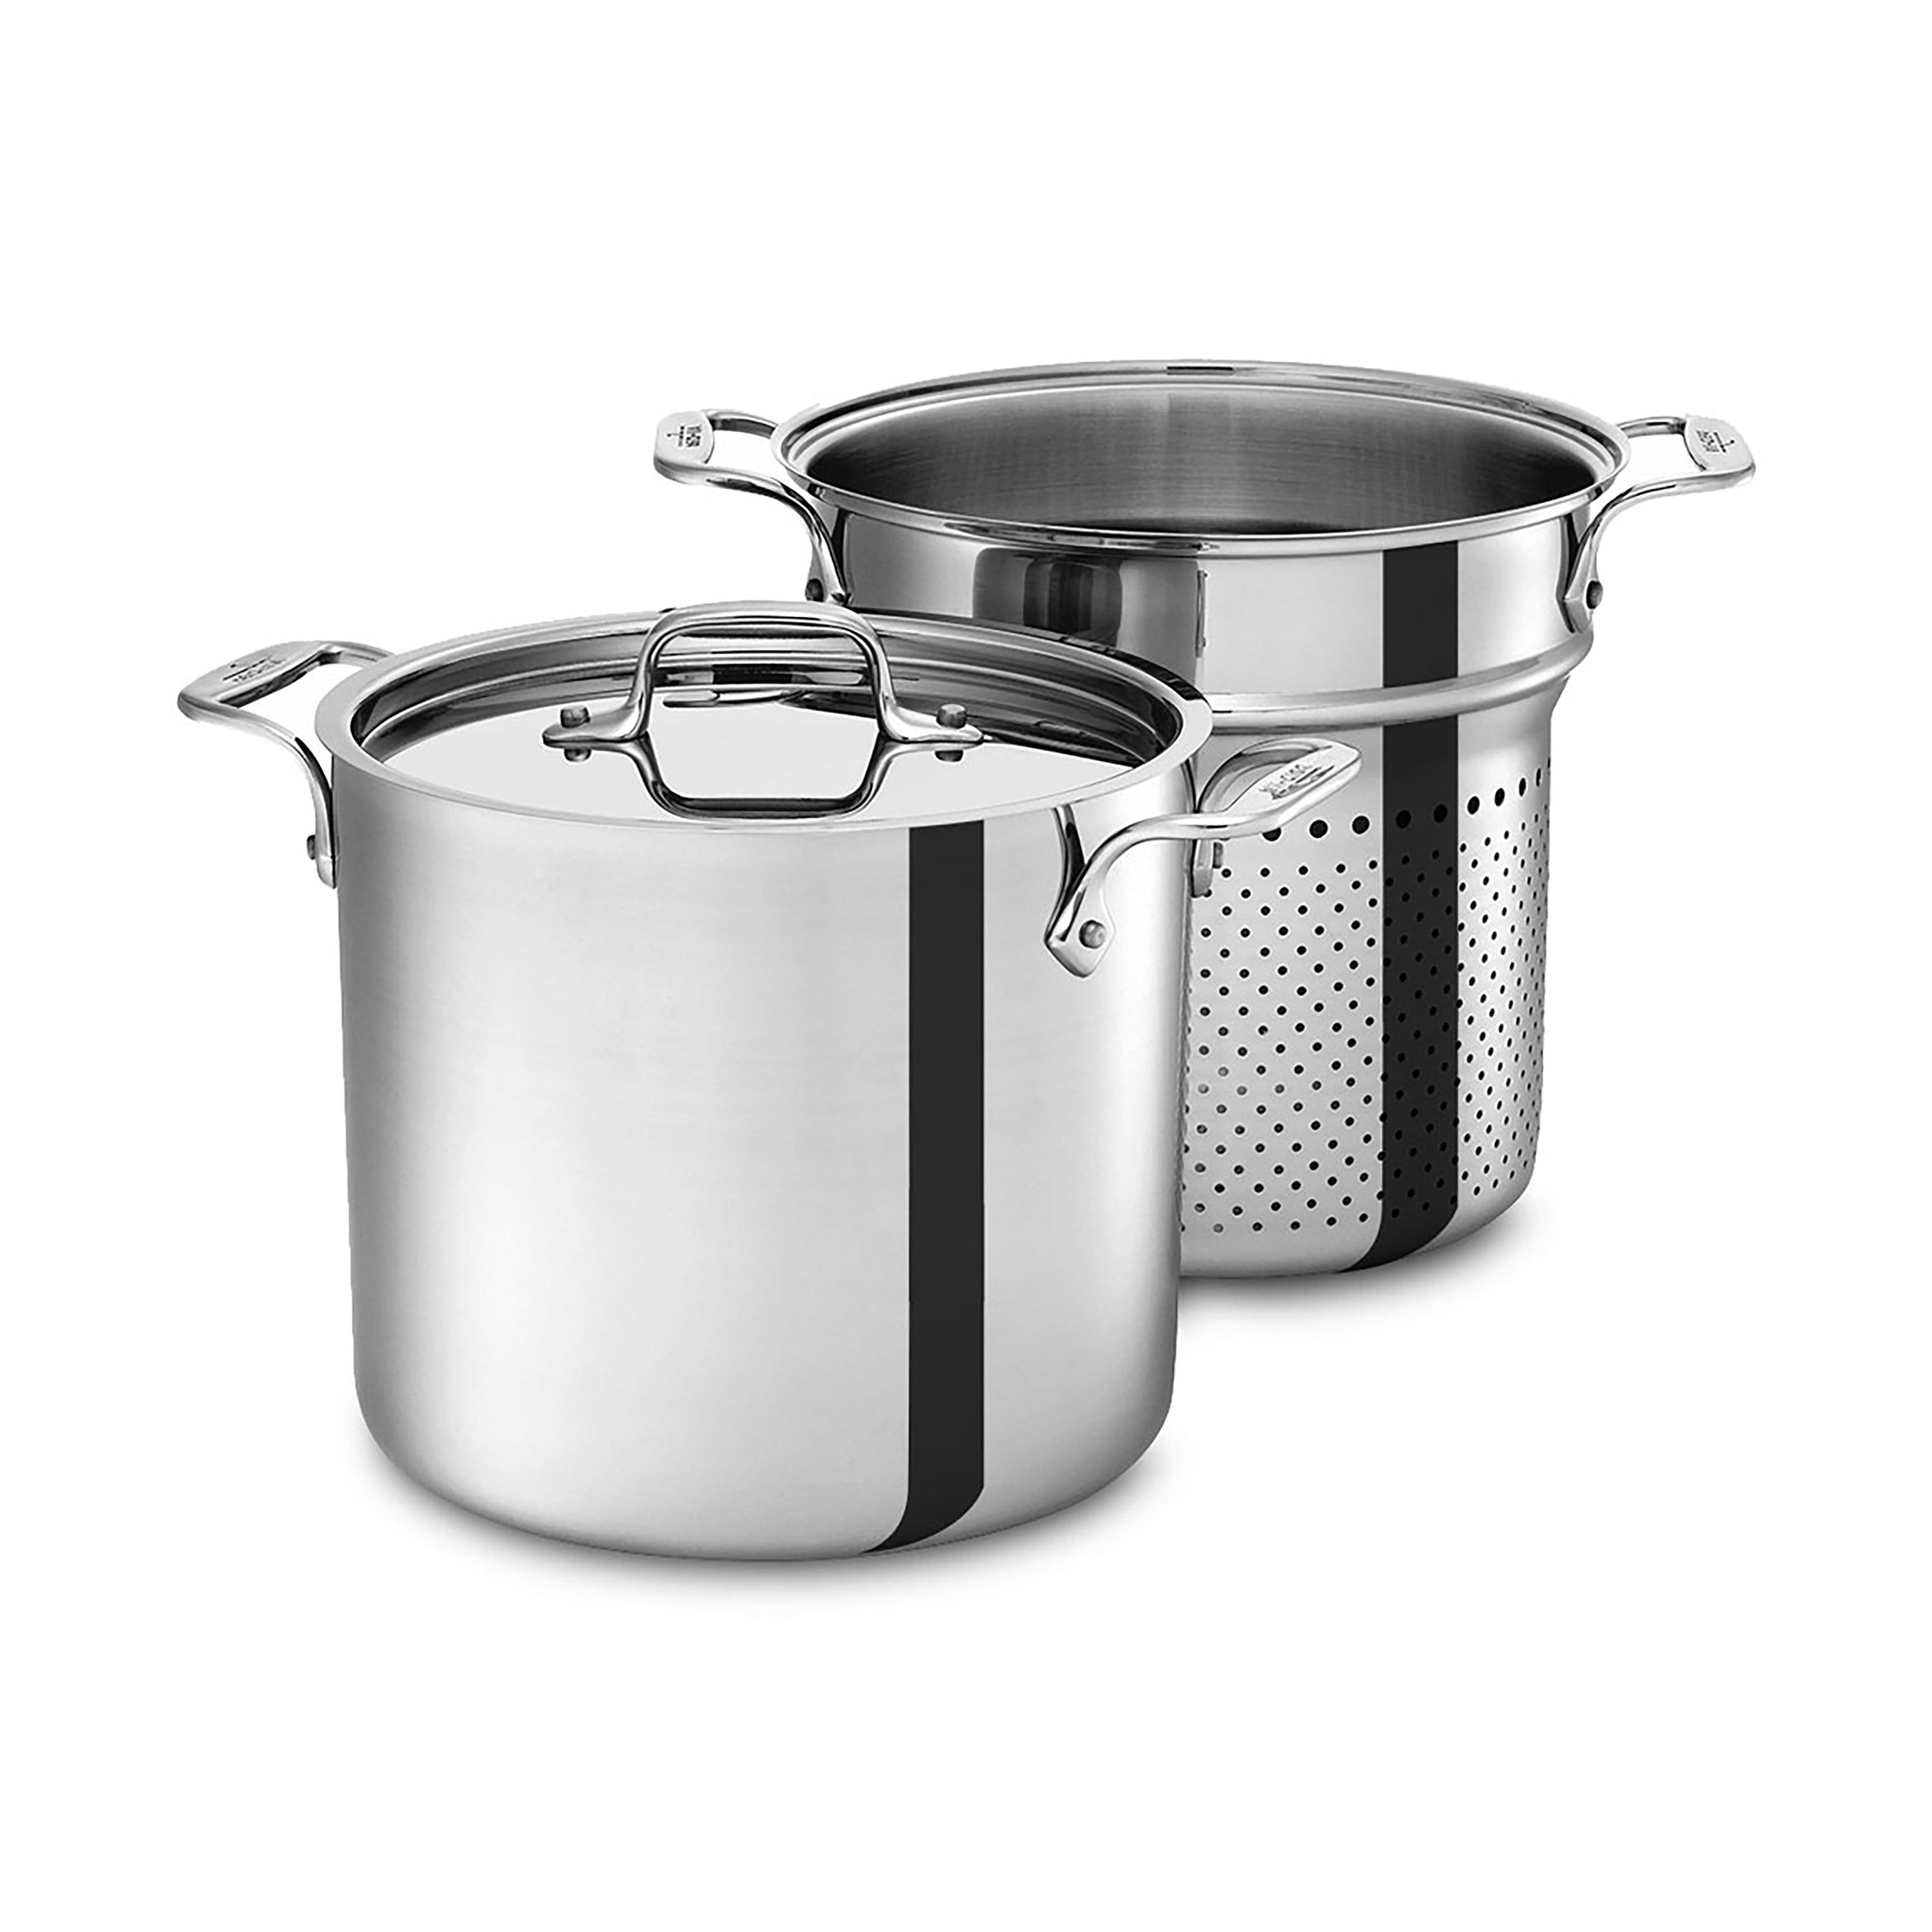 All-Clad d3 Stainless 7-quart Pasta Pentola Stock Pot with Insert